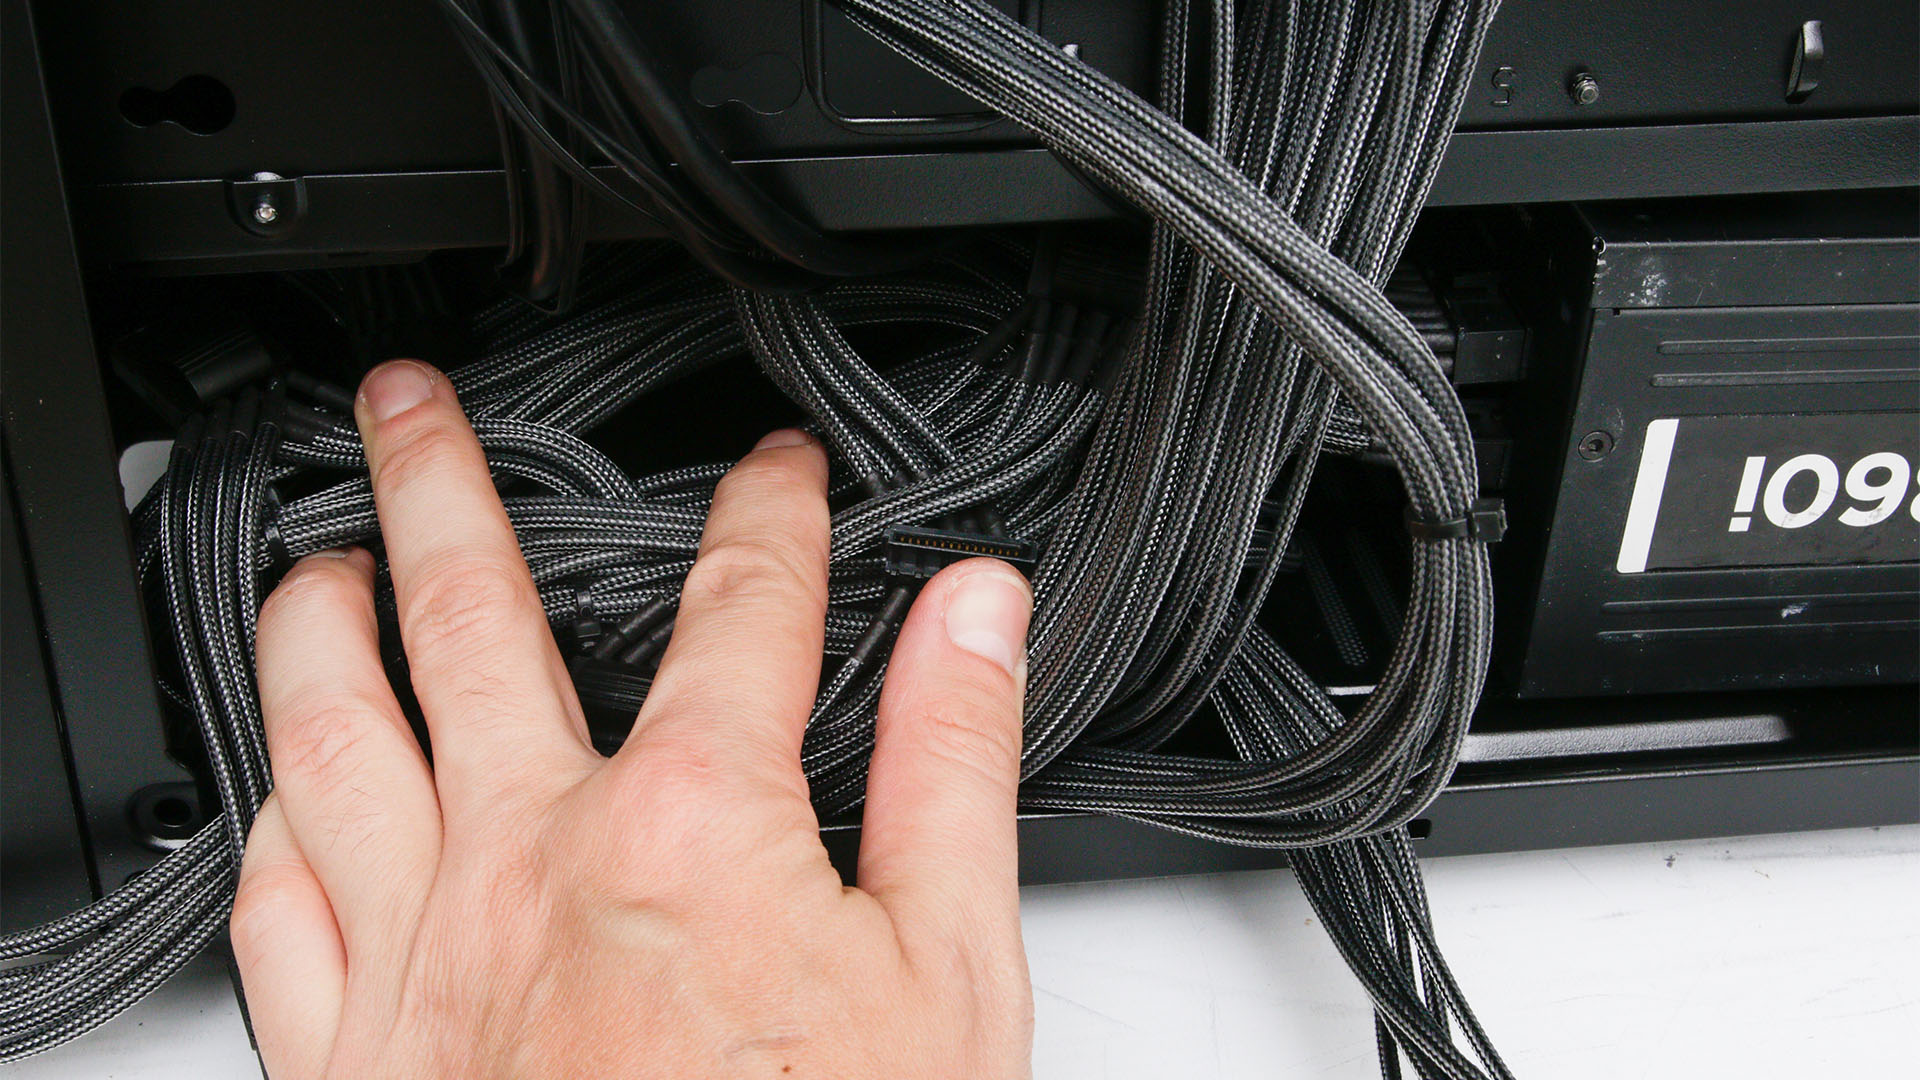 PC Build: Are Velcro straps safe for cable management?